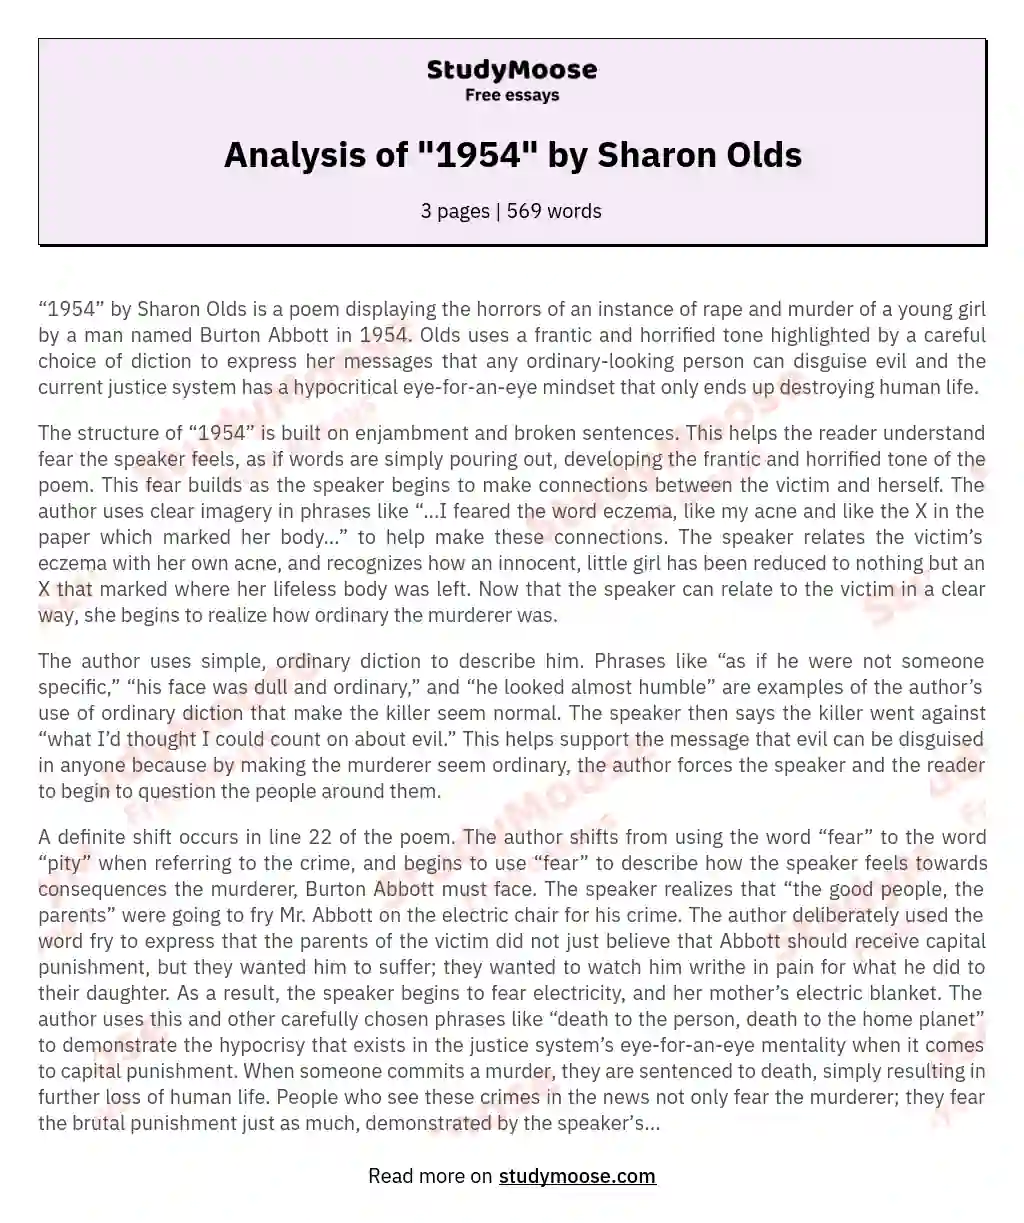 Analysis of "1954" by Sharon Olds essay